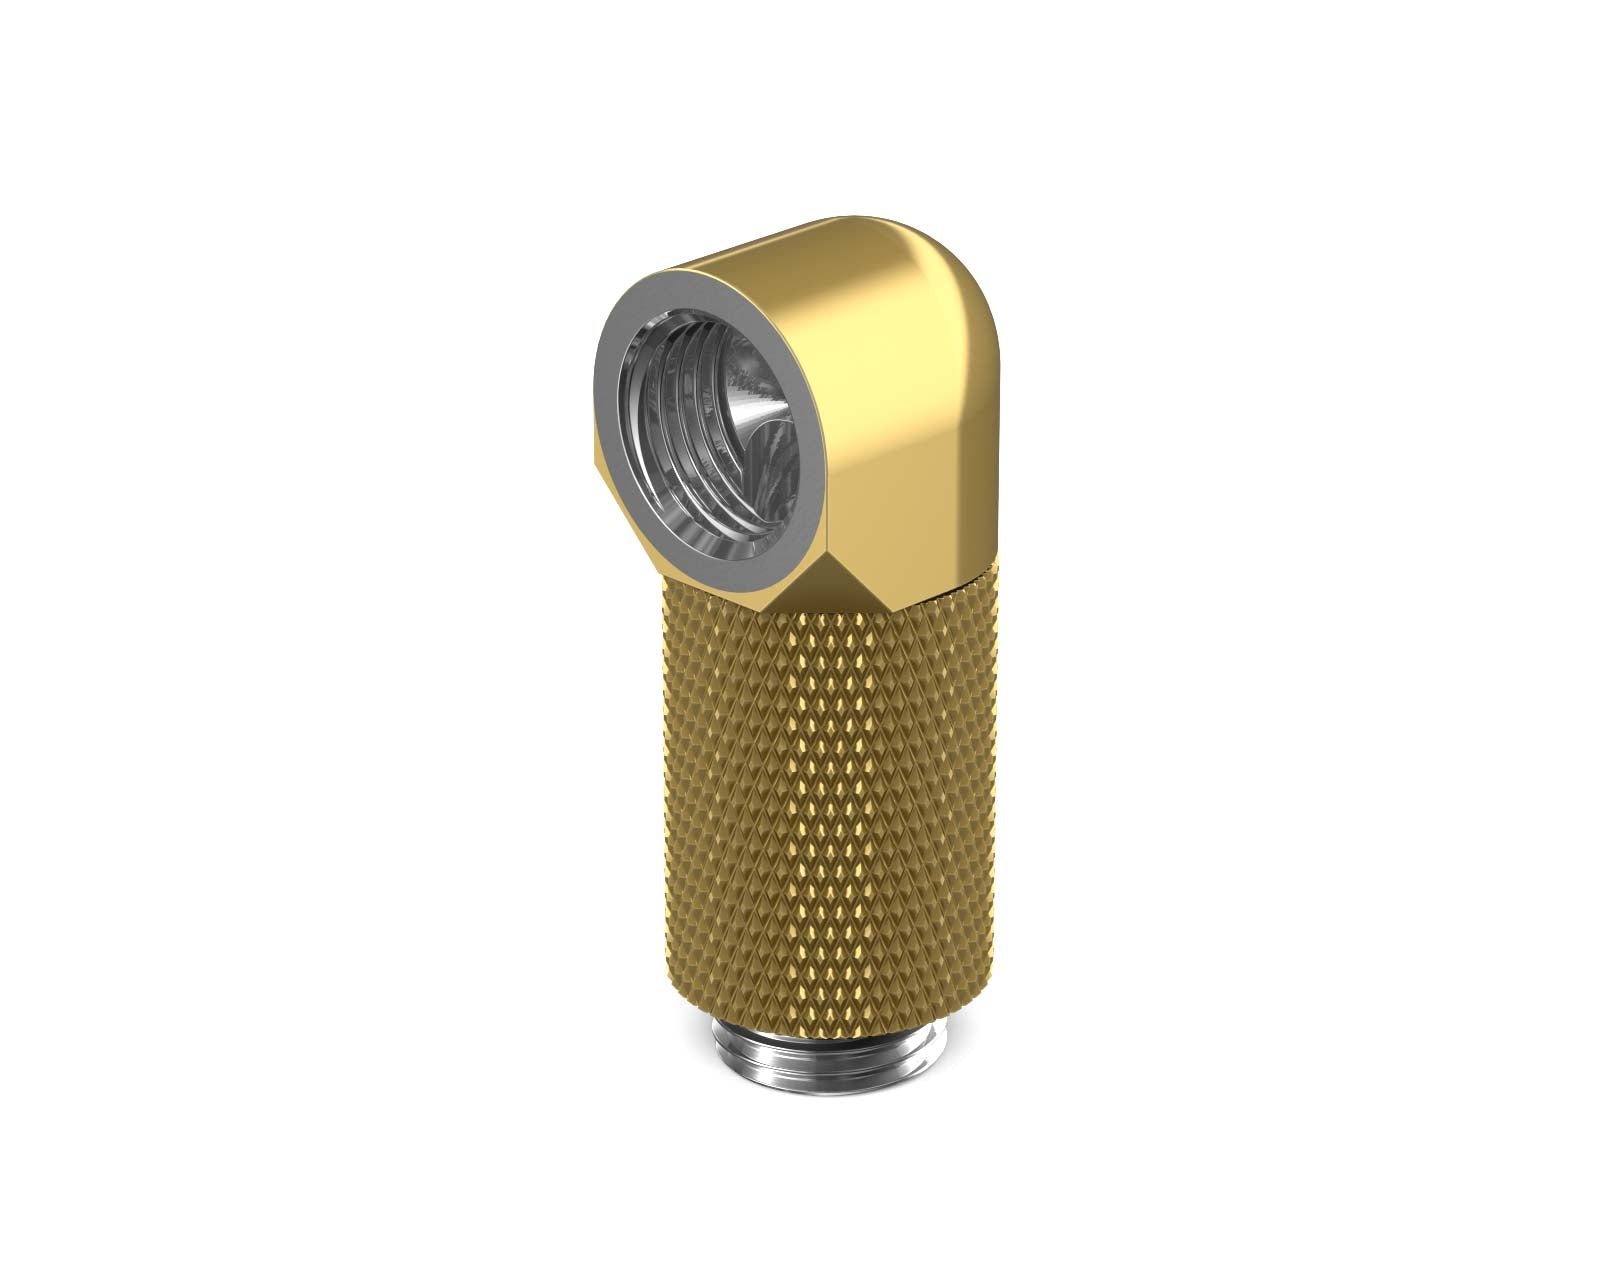 PrimoChill Male to Female G 1/4in. 90 Degree SX Rotary 25mm Extension Elbow Fitting - PrimoChill - KEEPING IT COOL Candy Gold